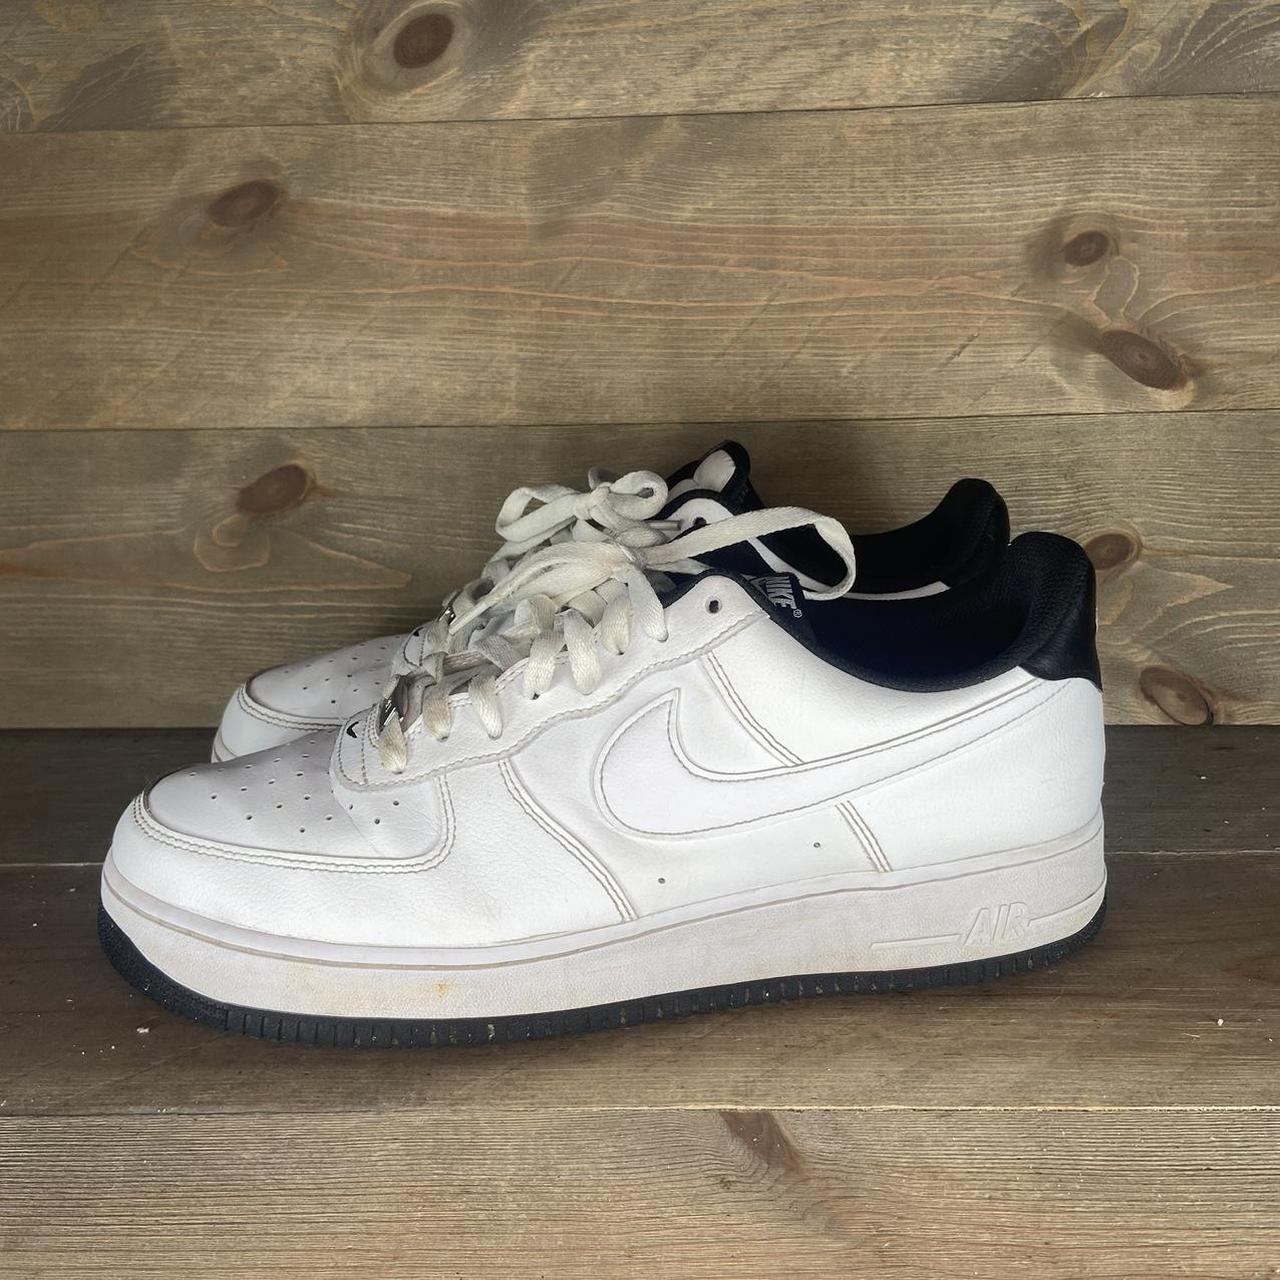 Nike Air Force One Low White Sneaker For Men